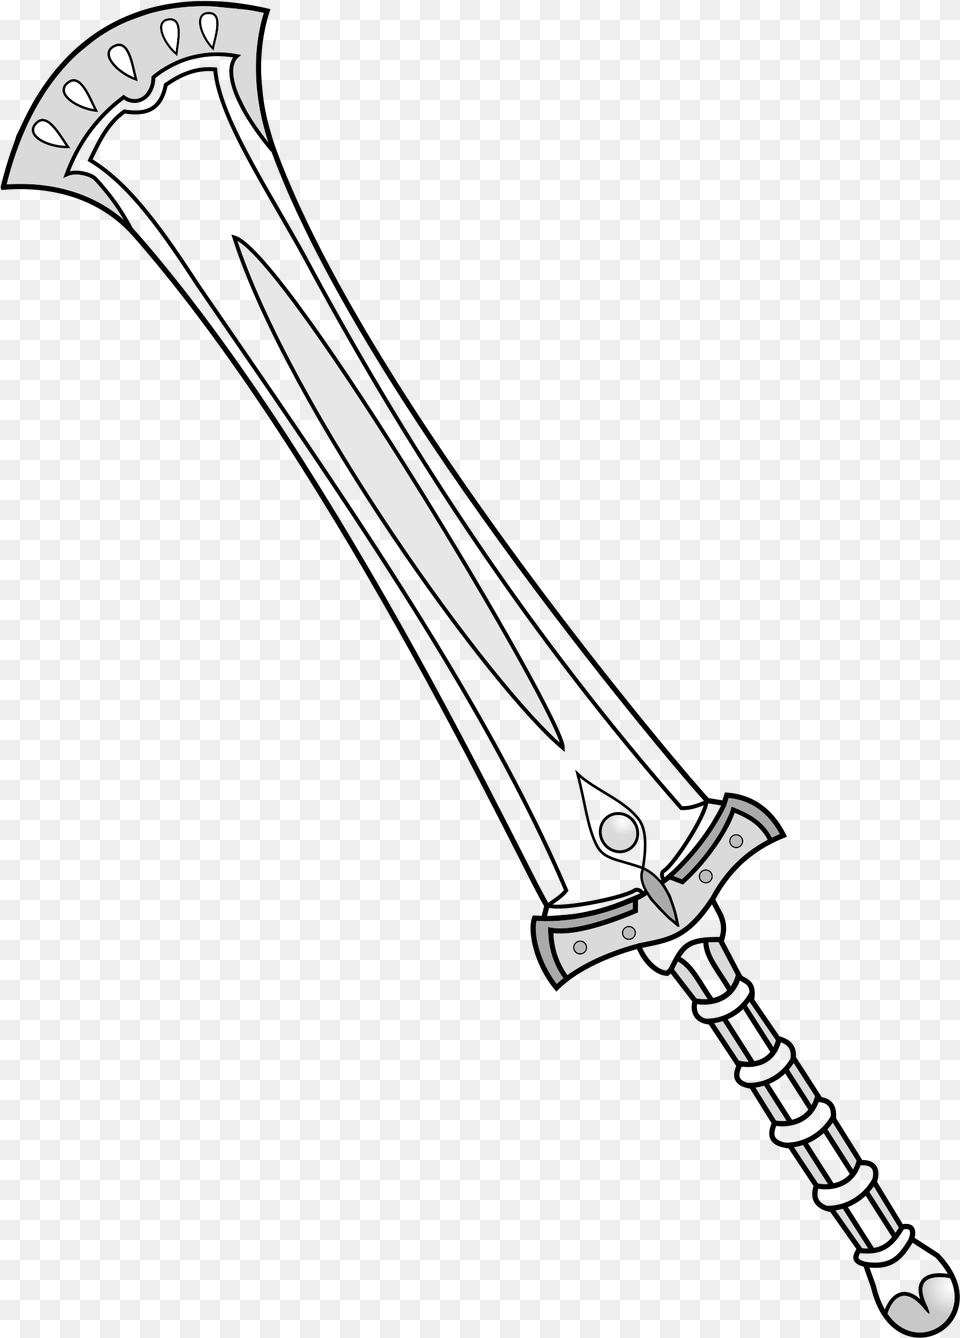 This Free Icons Design Of Fantasy Greatsword, Sword, Weapon, Blade, Dagger Png